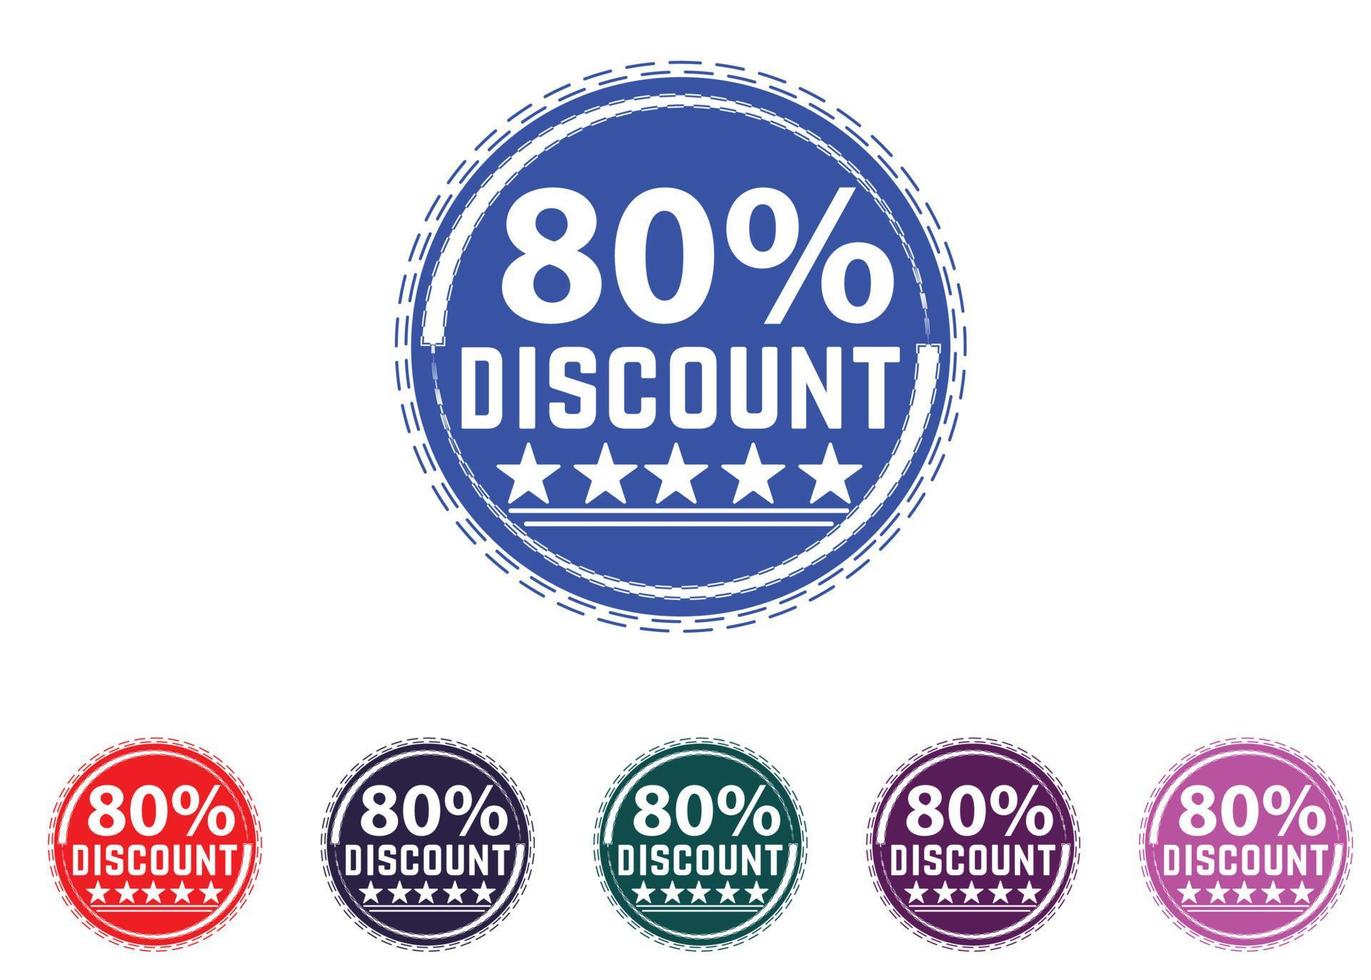 80 percent discount new offer logo and icon design vector